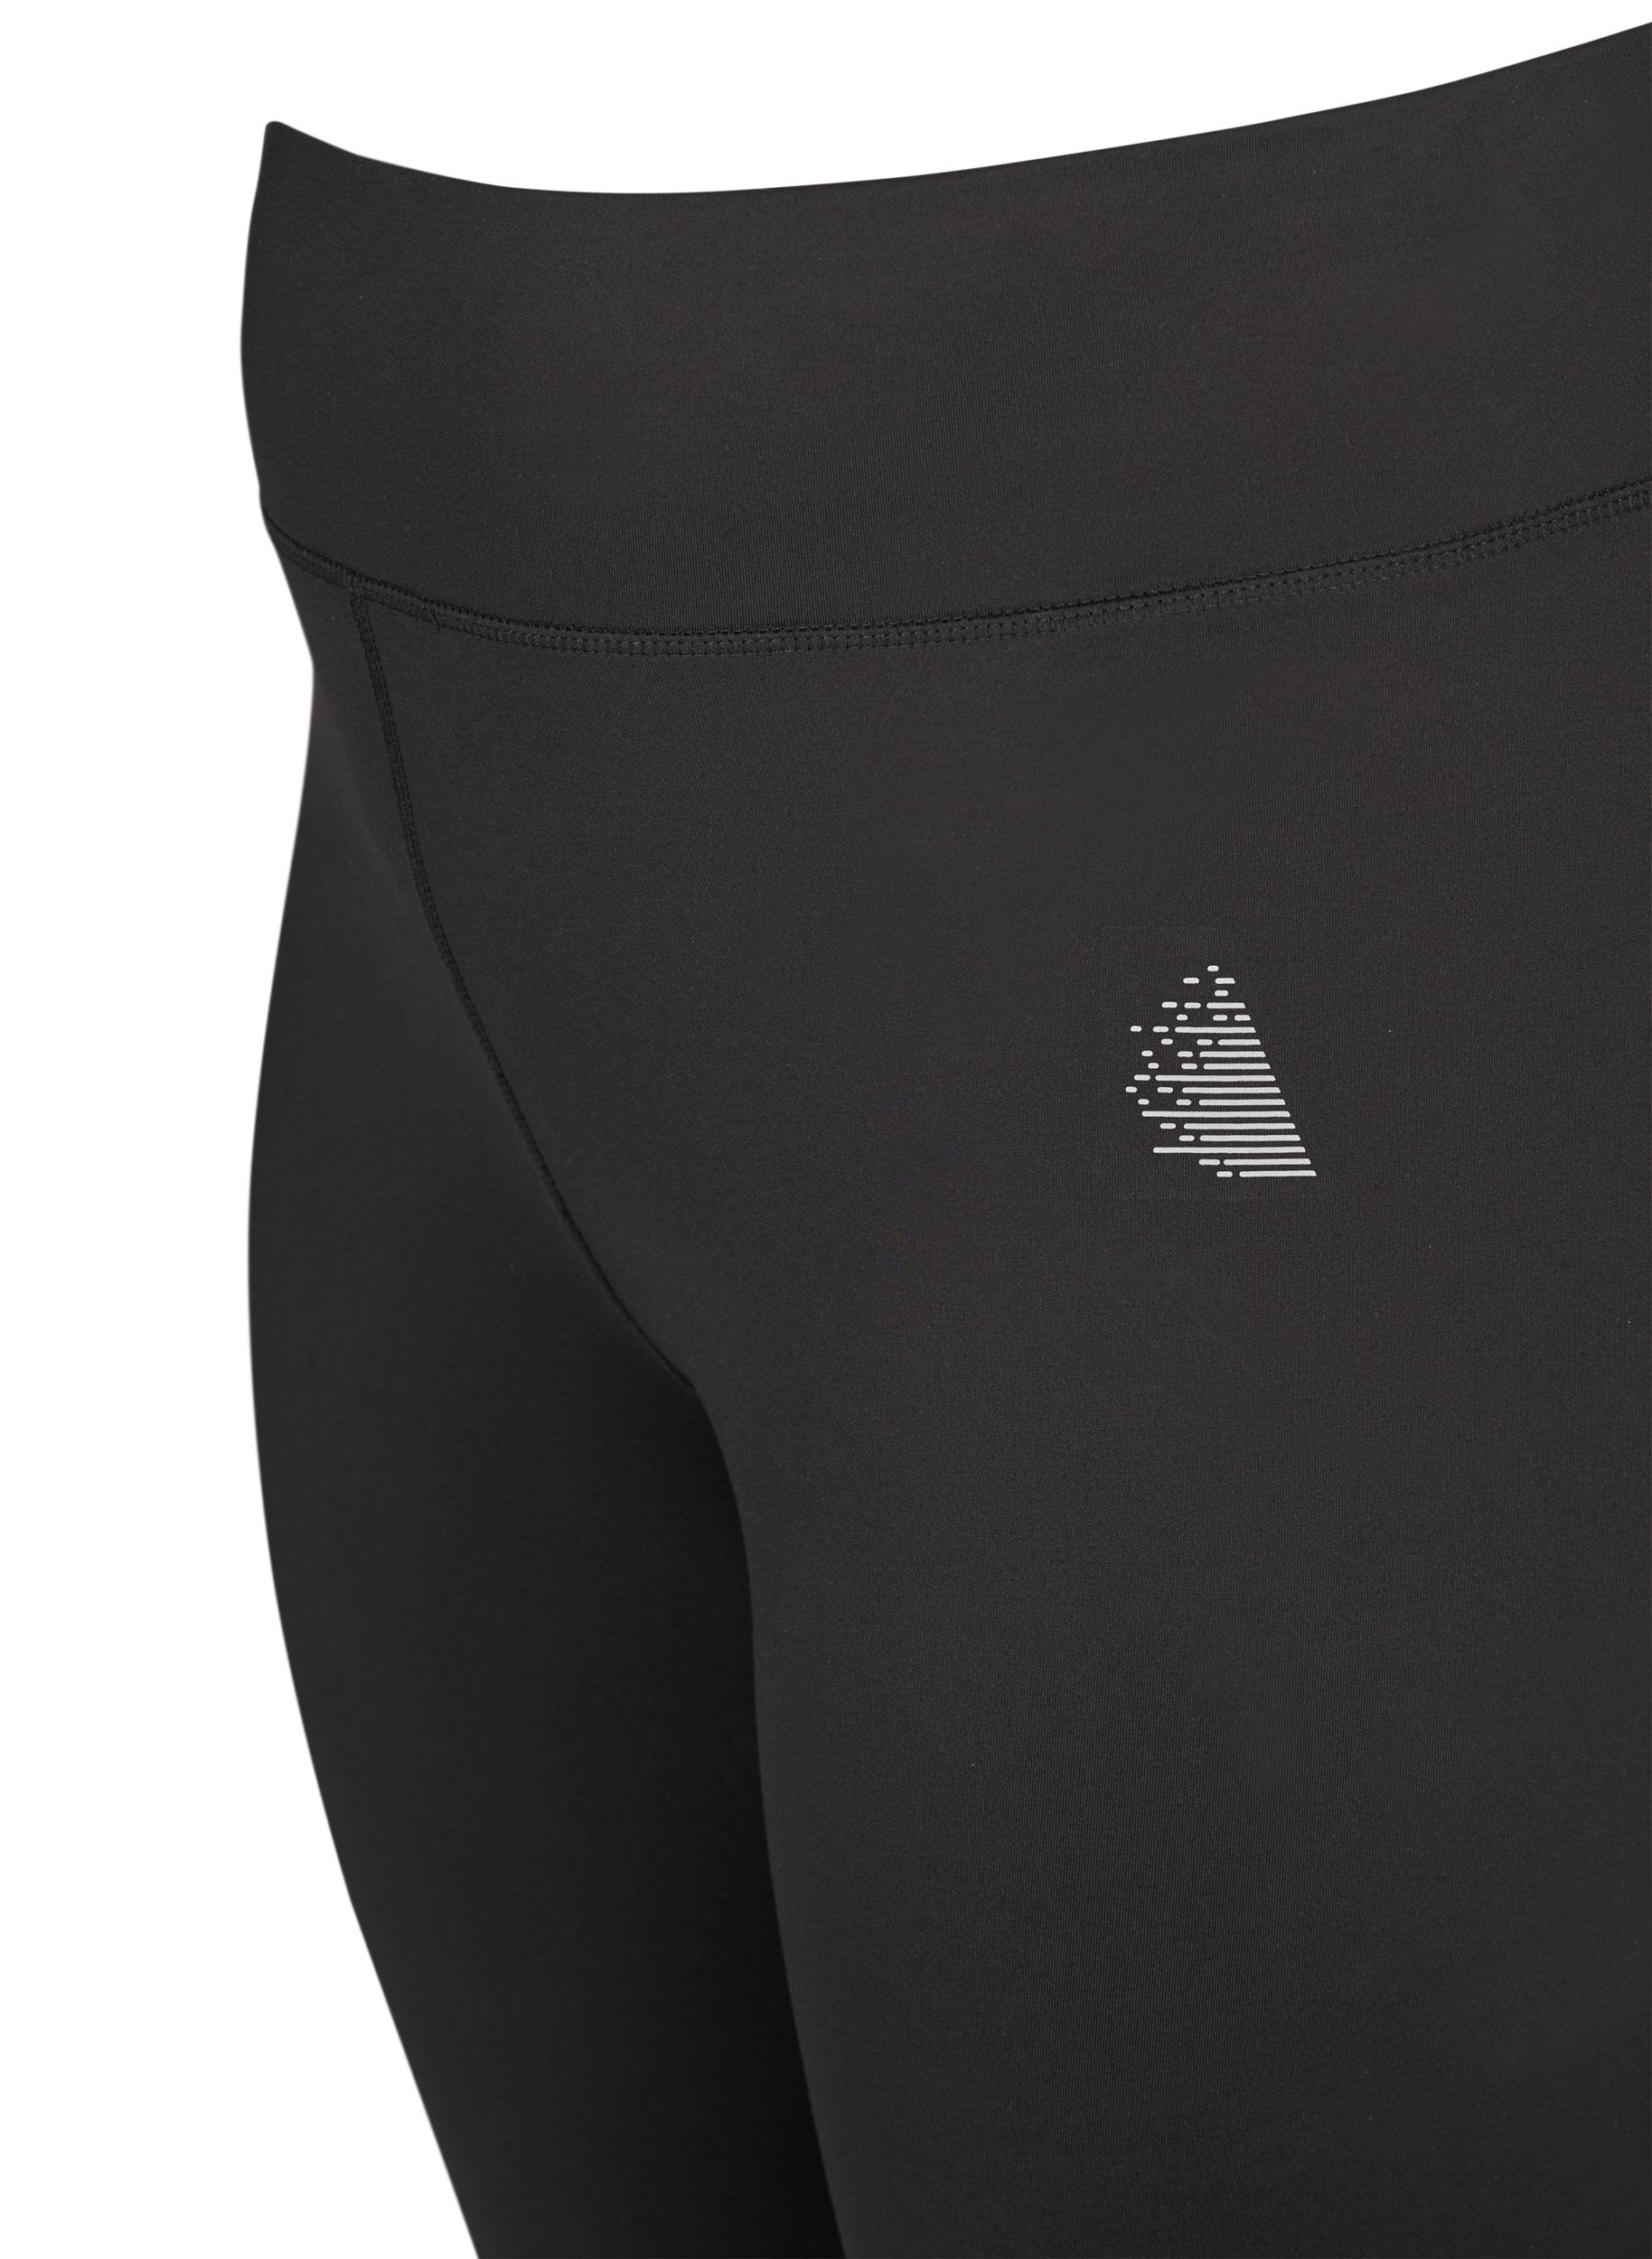 ZiABASIC - 7/8 - TIGHTS - SPORT - NOOS